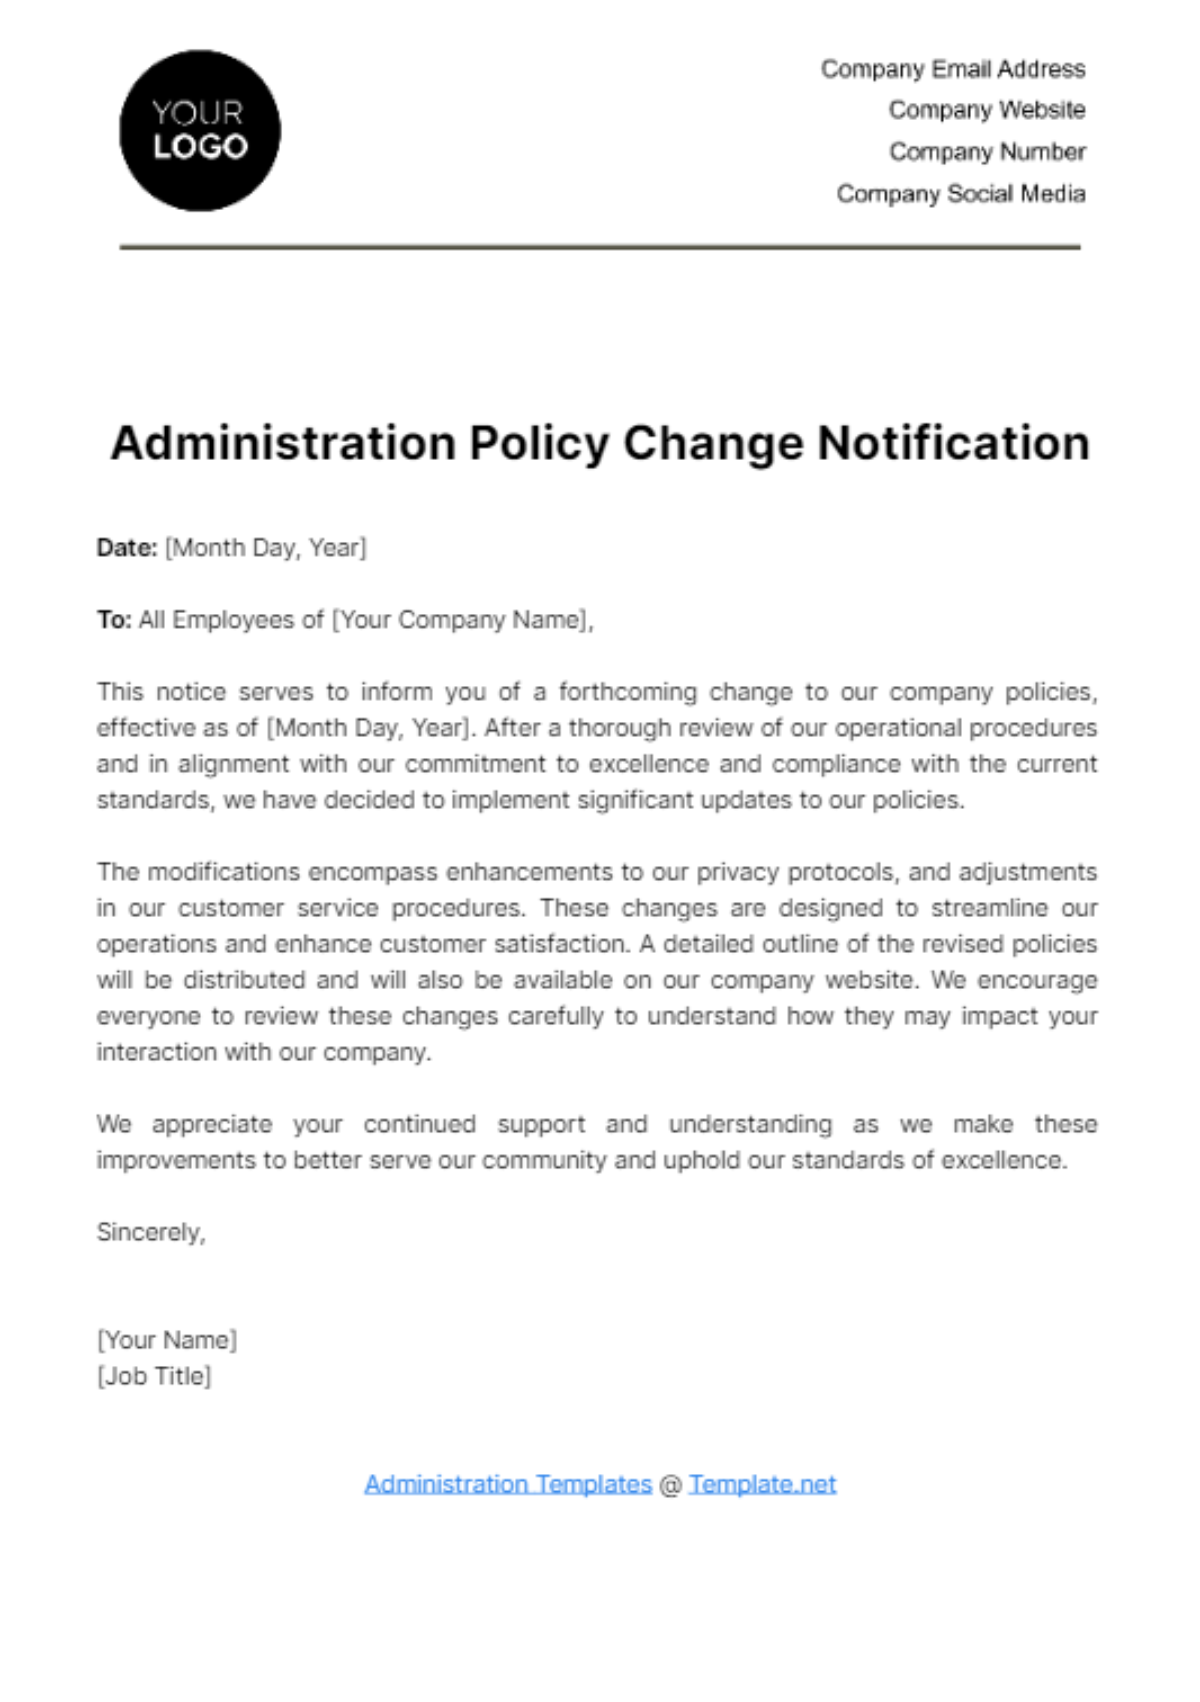 Free Administration Policy Change Notification Template